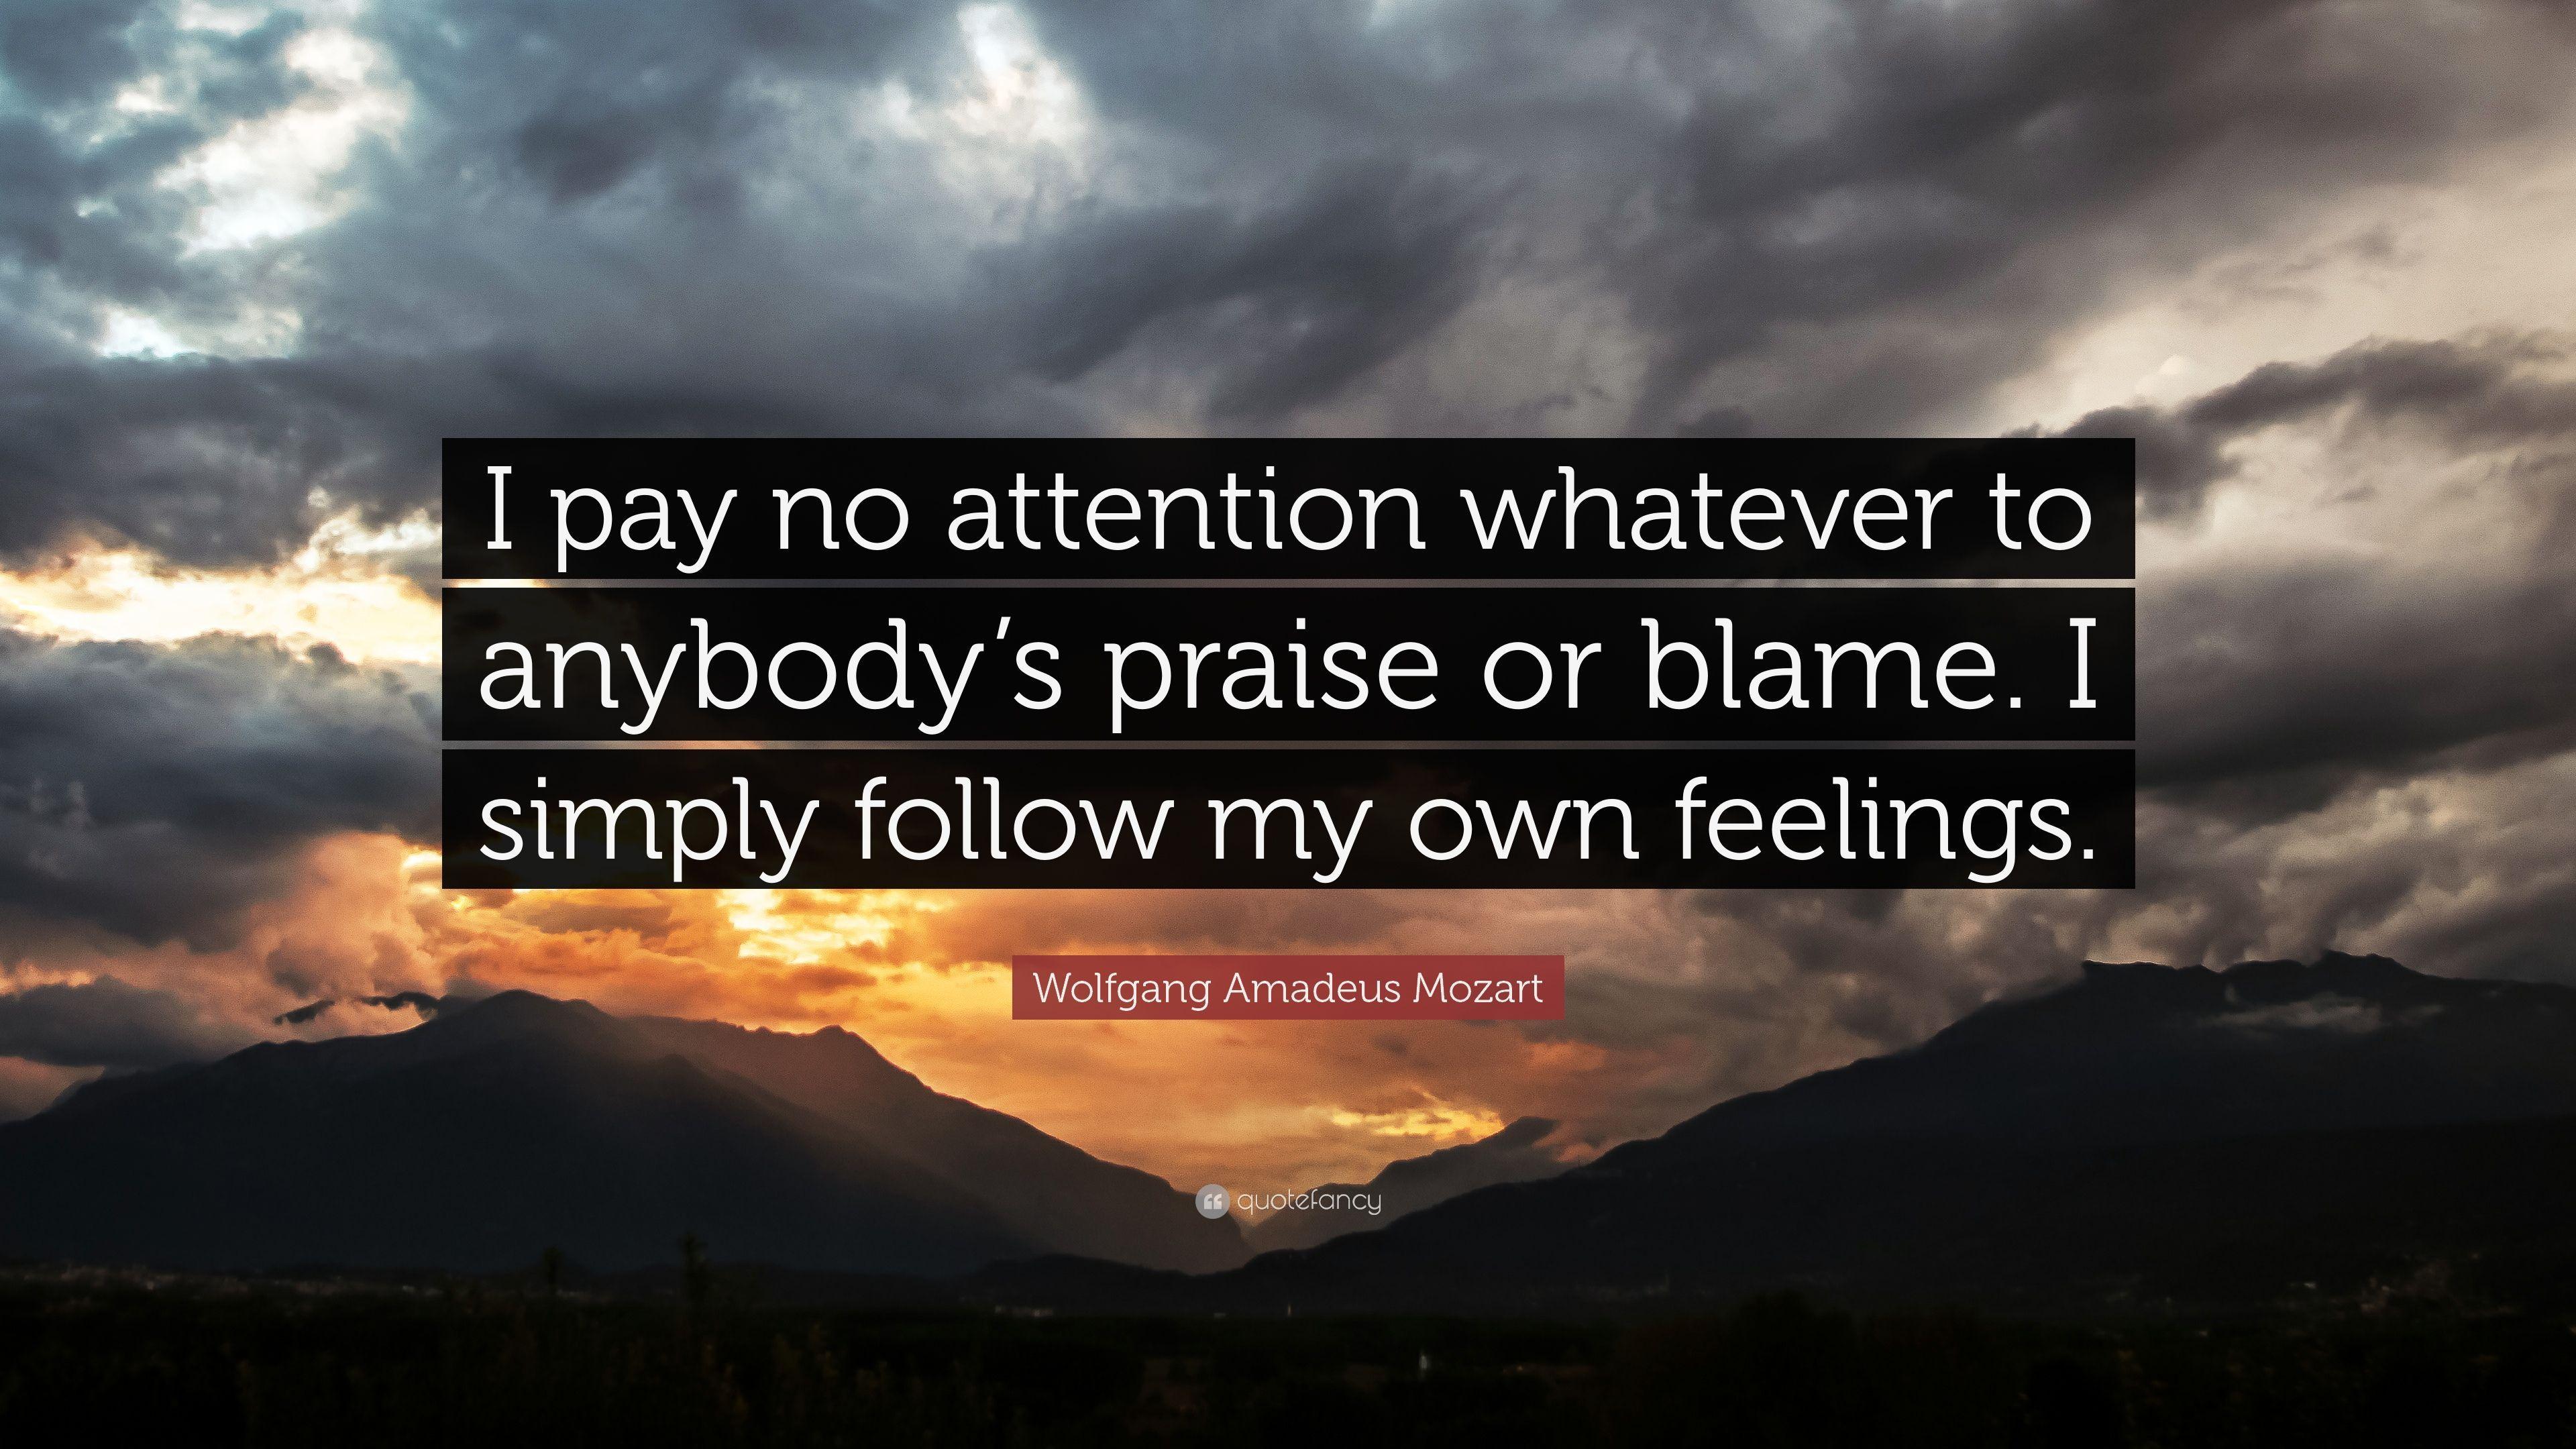 Wolfgang Amadeus Mozart Quote: “I pay no attention whatever